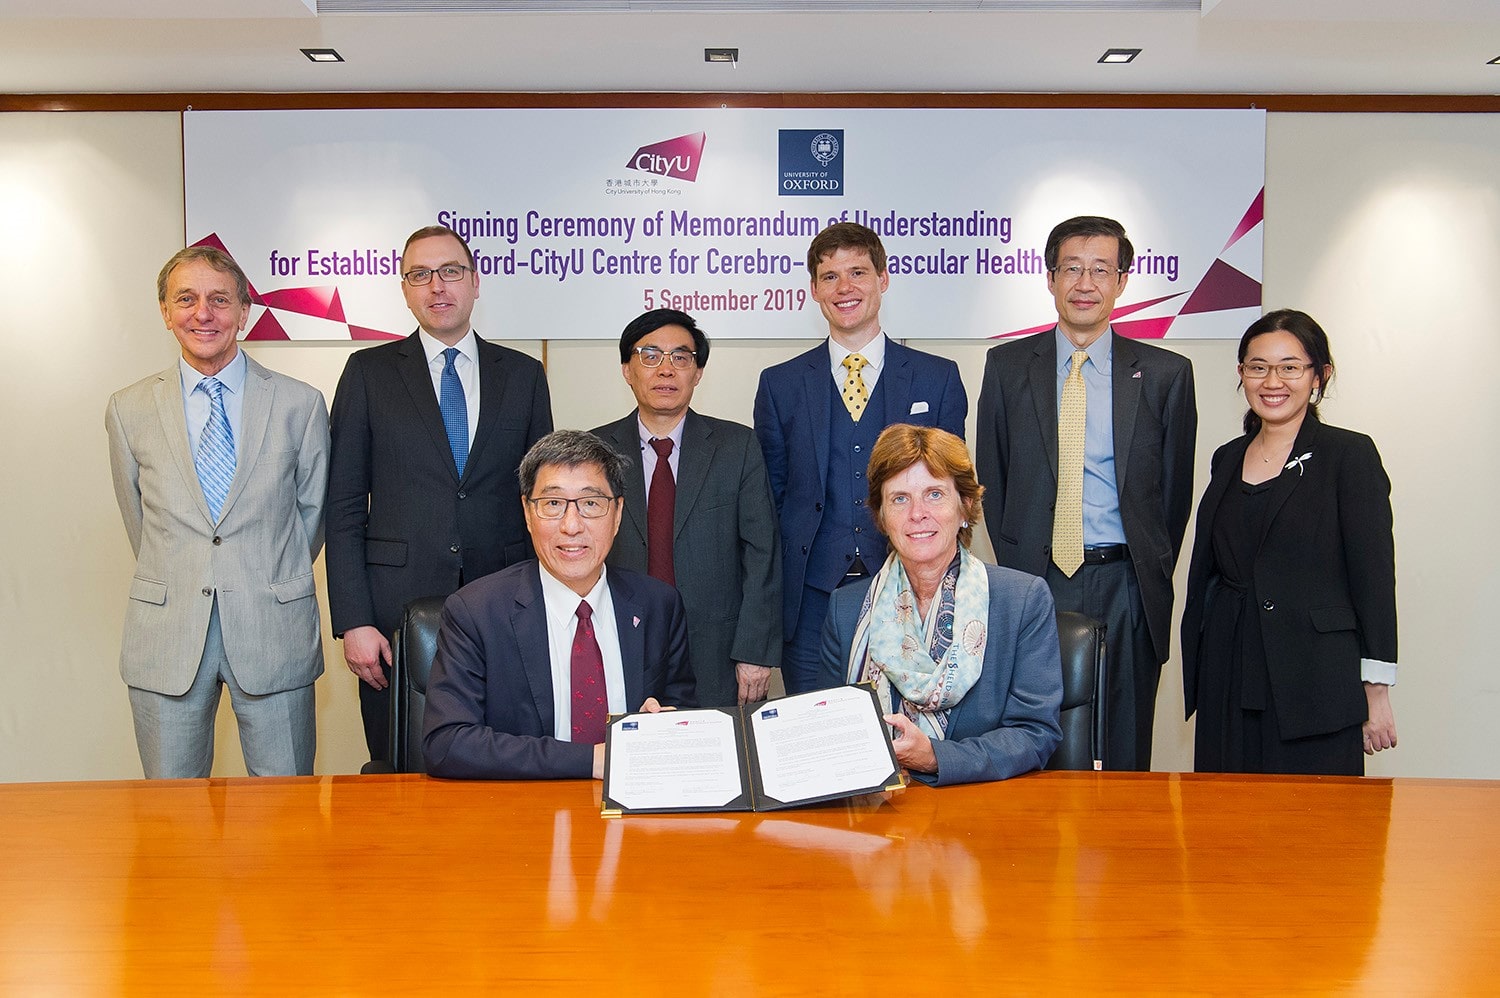 At the signing ceremony of MoU between City University of Hong Kong and University of Oxford.